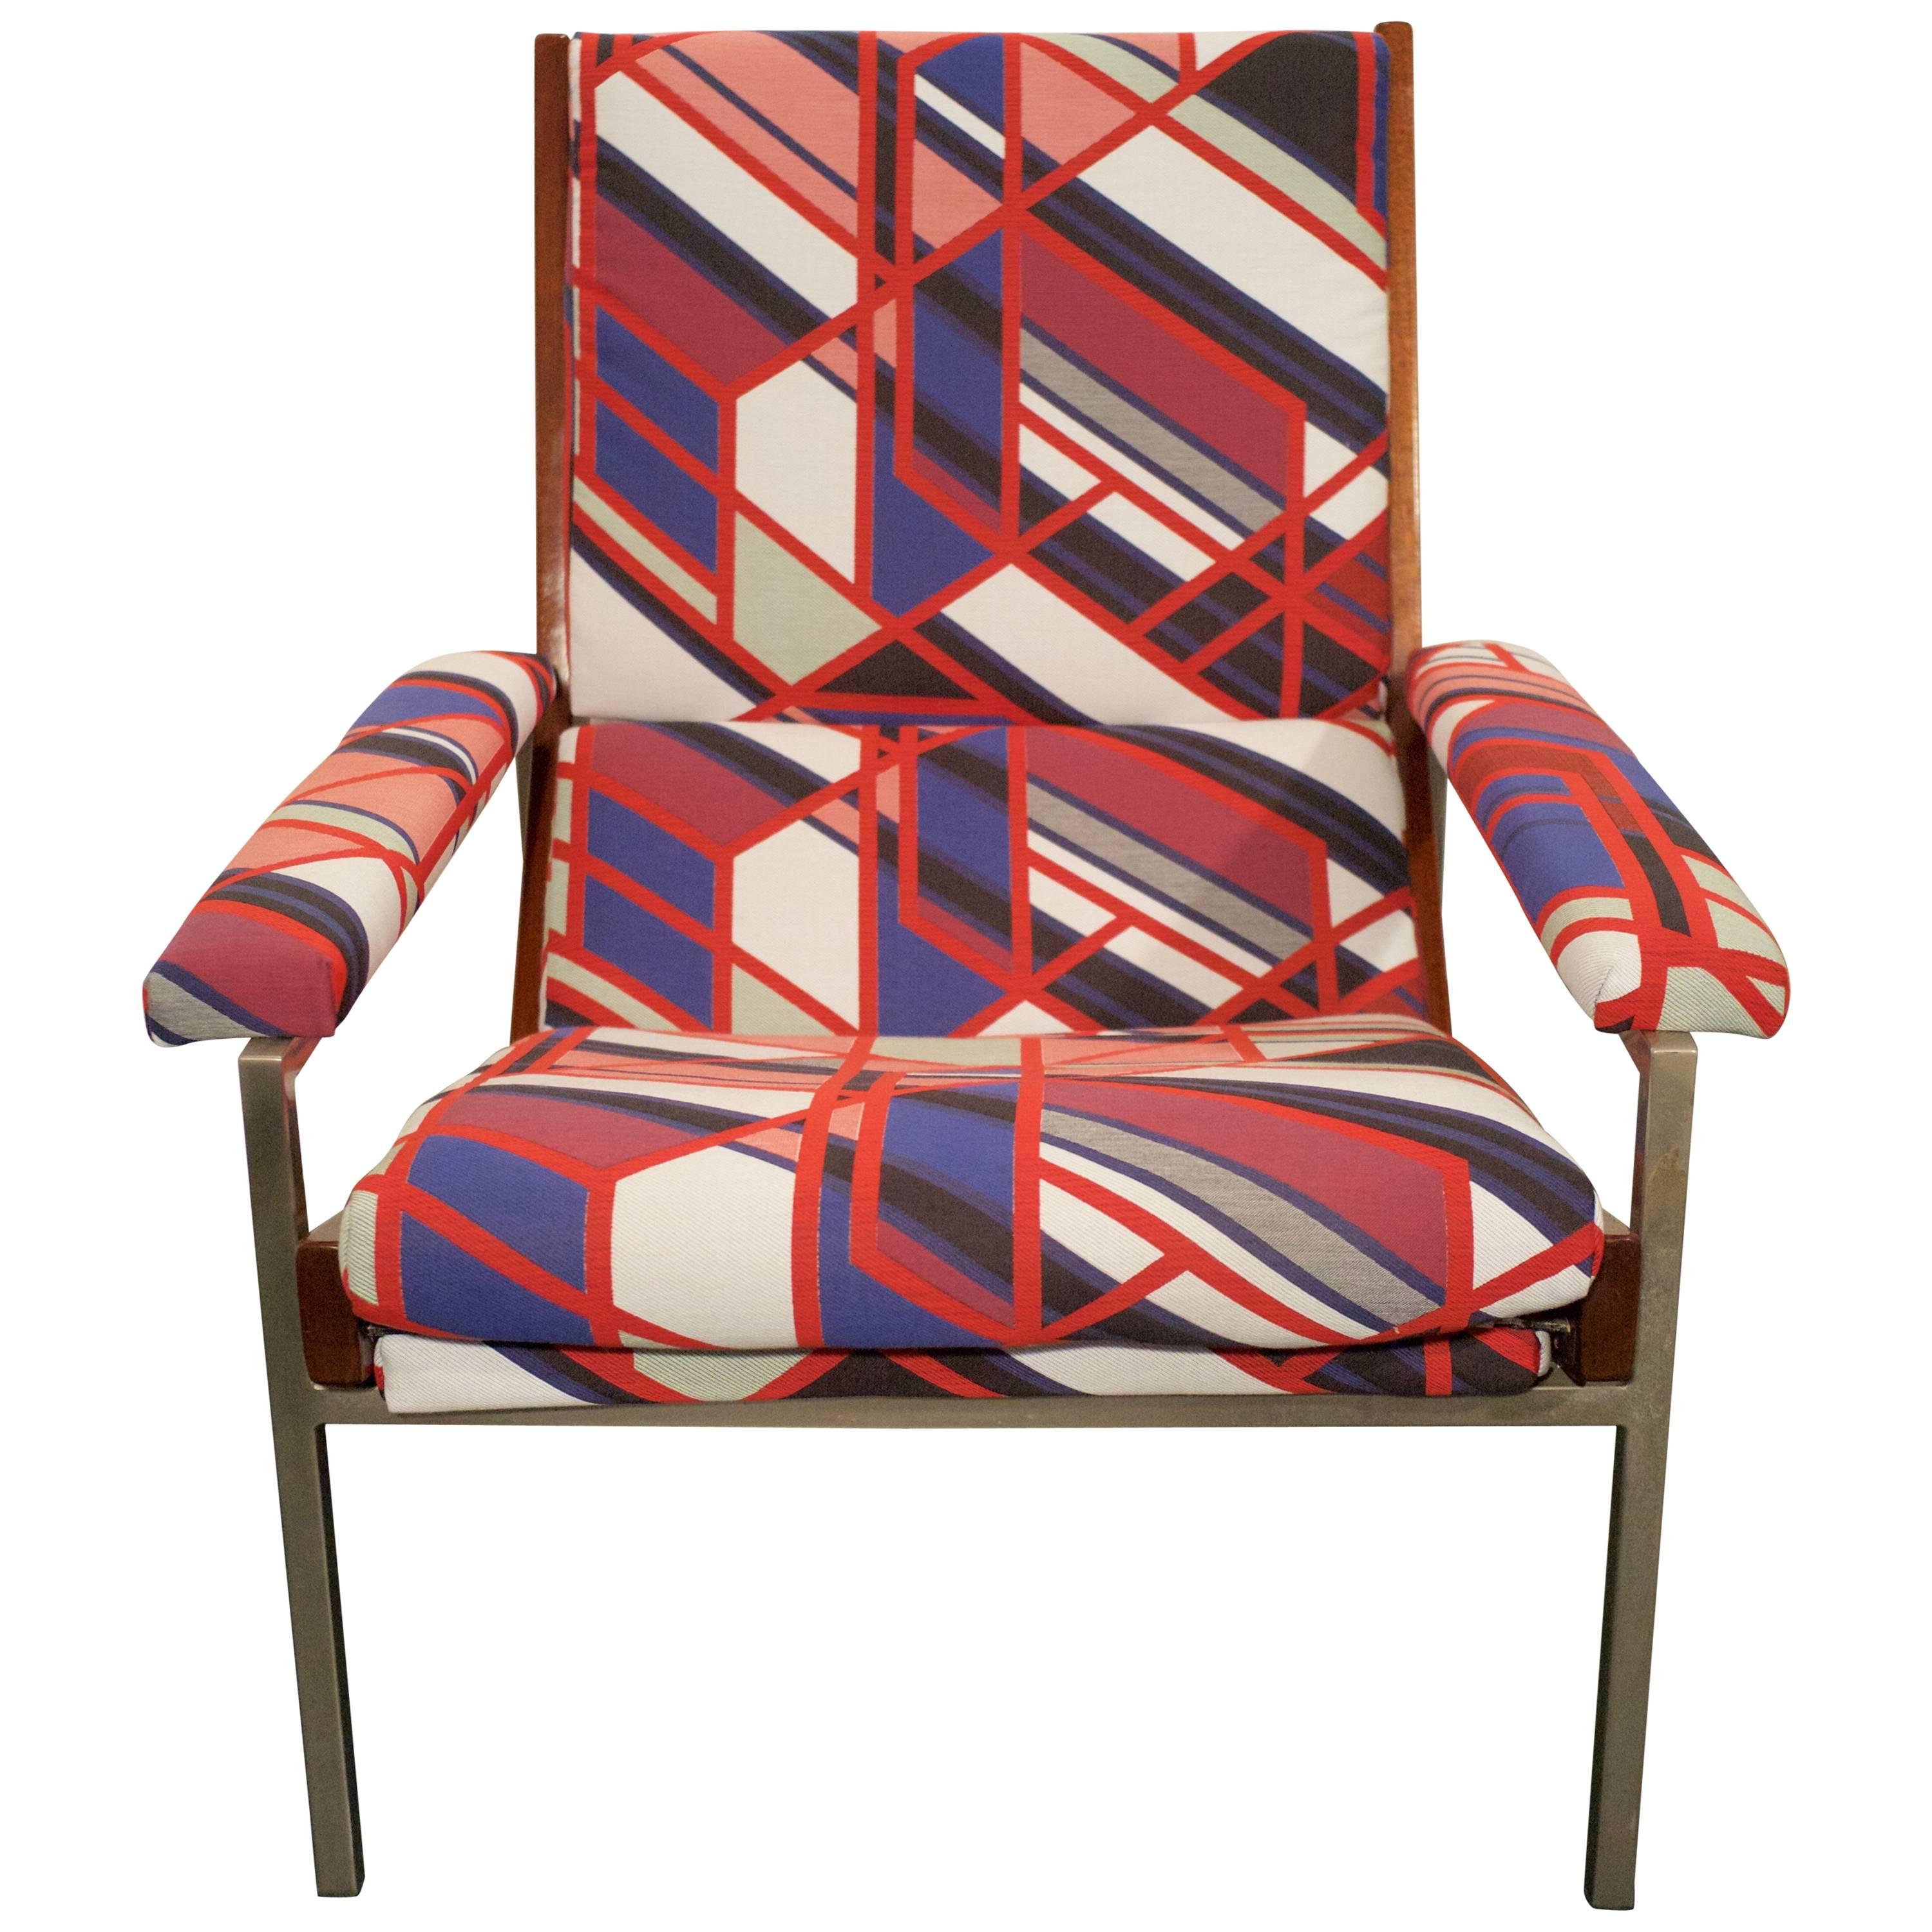 Rob Parry 'Lotus' Armchair Upholstered in a Fabric by Sarah Morris For Sale